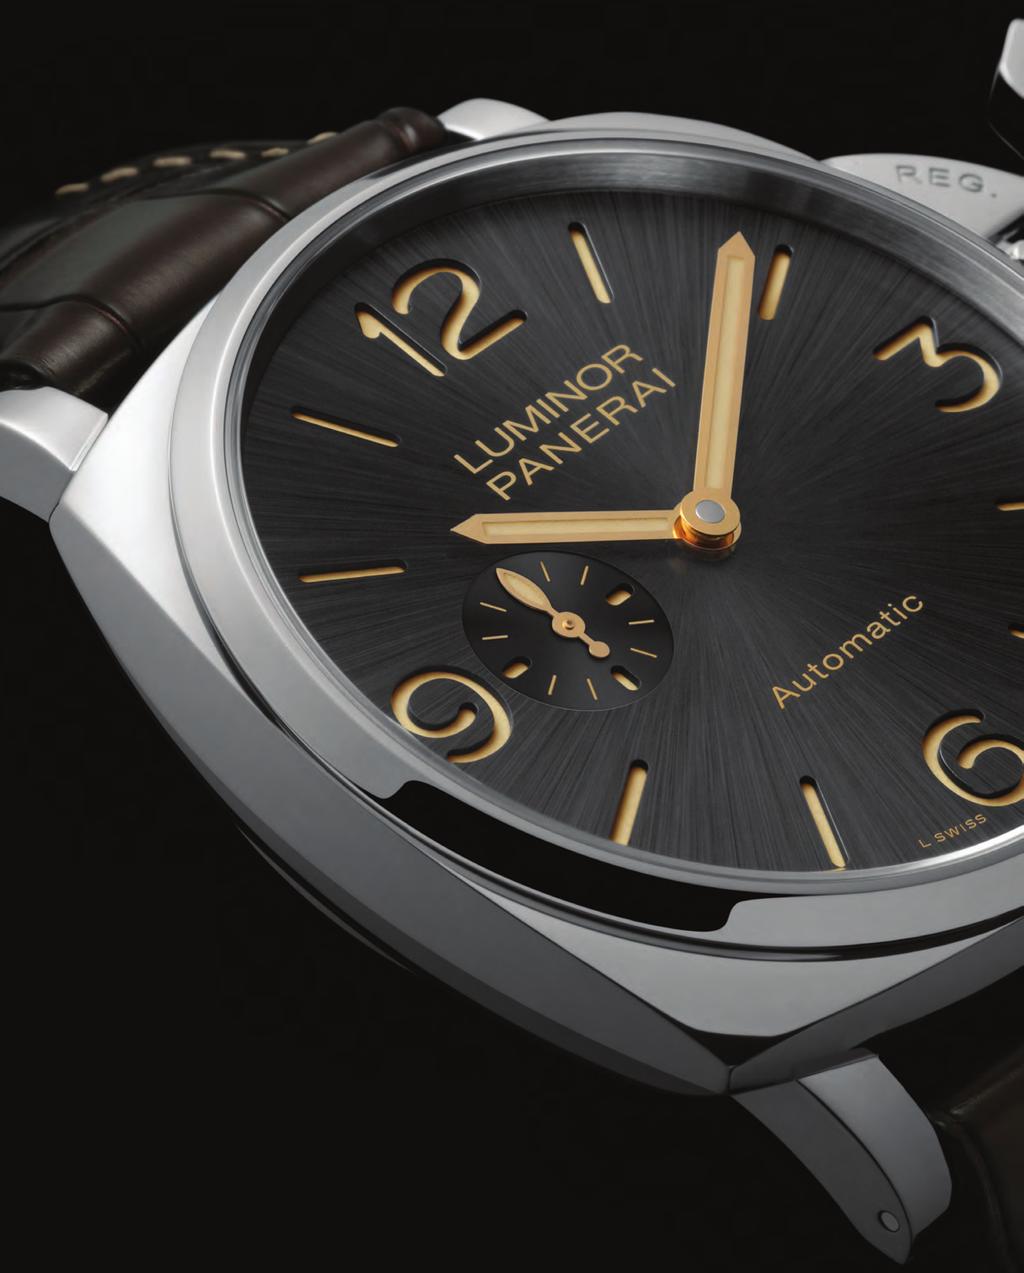 WHAT S NEW The founding of Officine Panerai It was in Florence in 1860 that Giovanni Panerai opened the